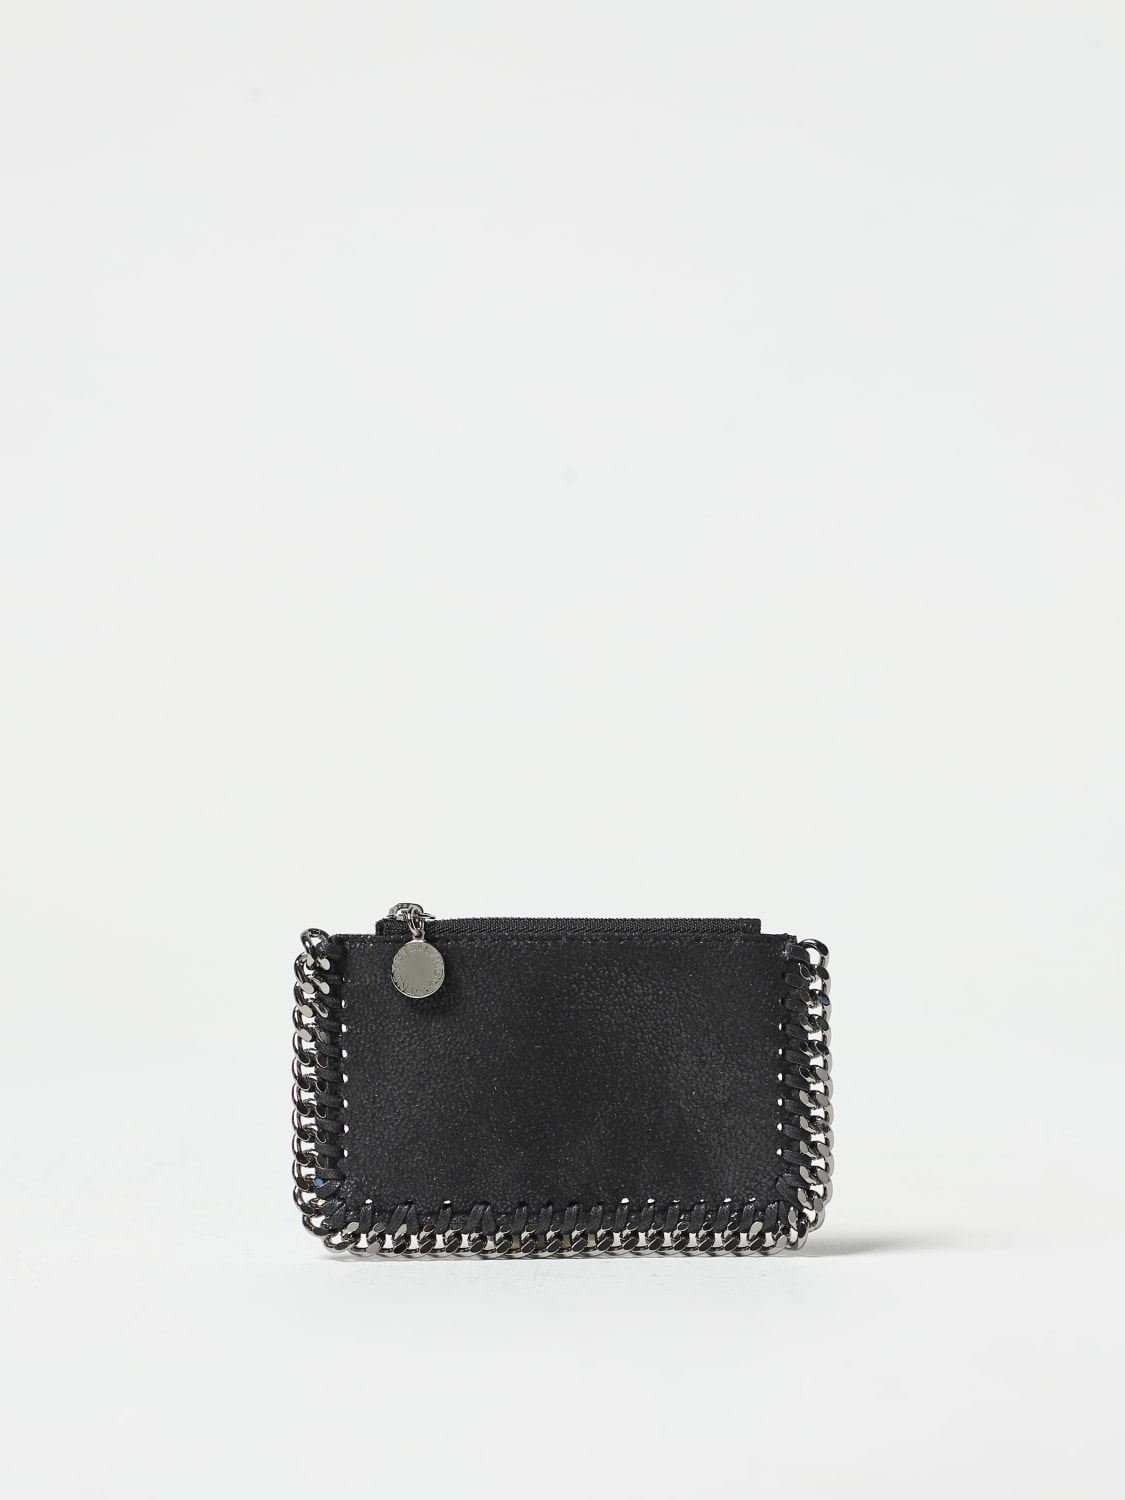 Stella McCartney credit card holder in synthetic leather